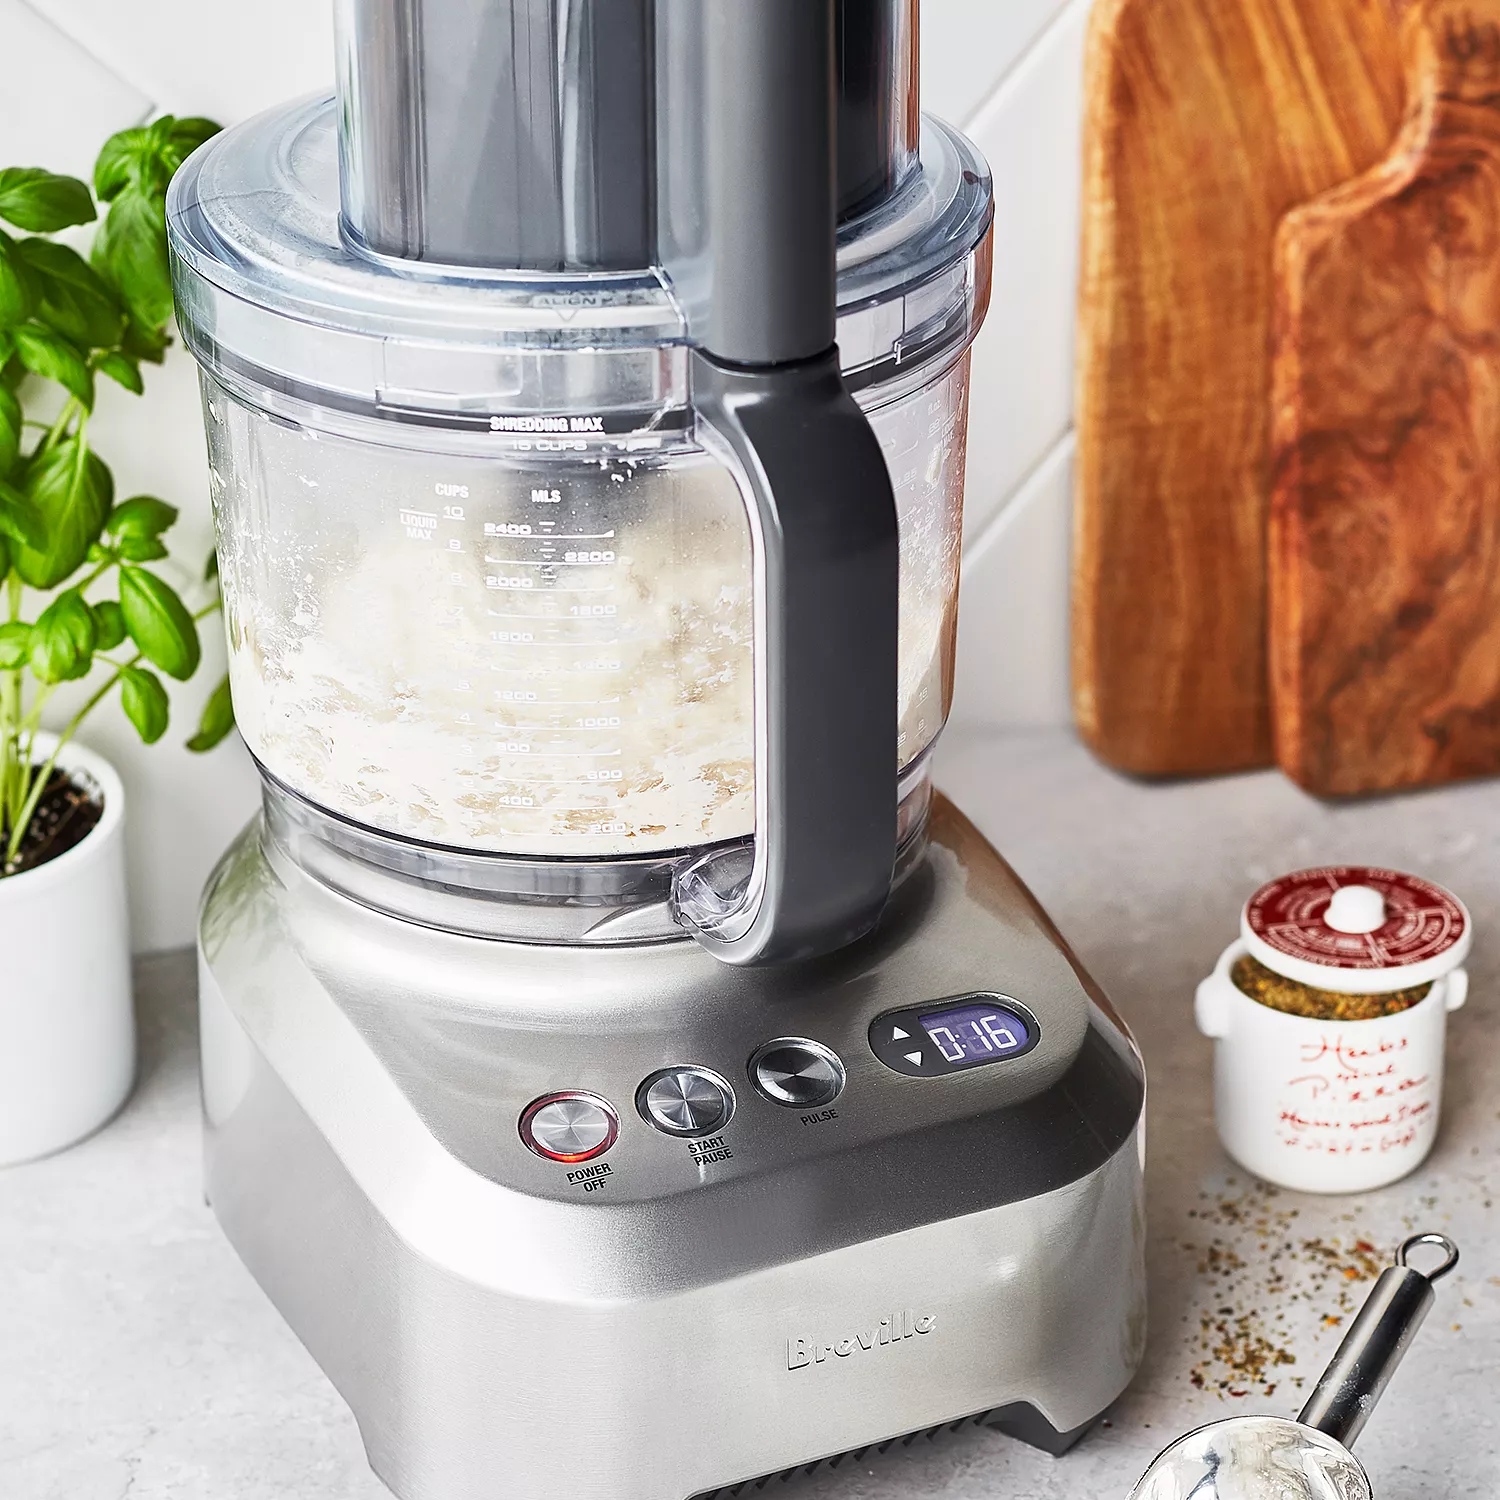 Breville 16-Cup Sous Chef™ Food Processor